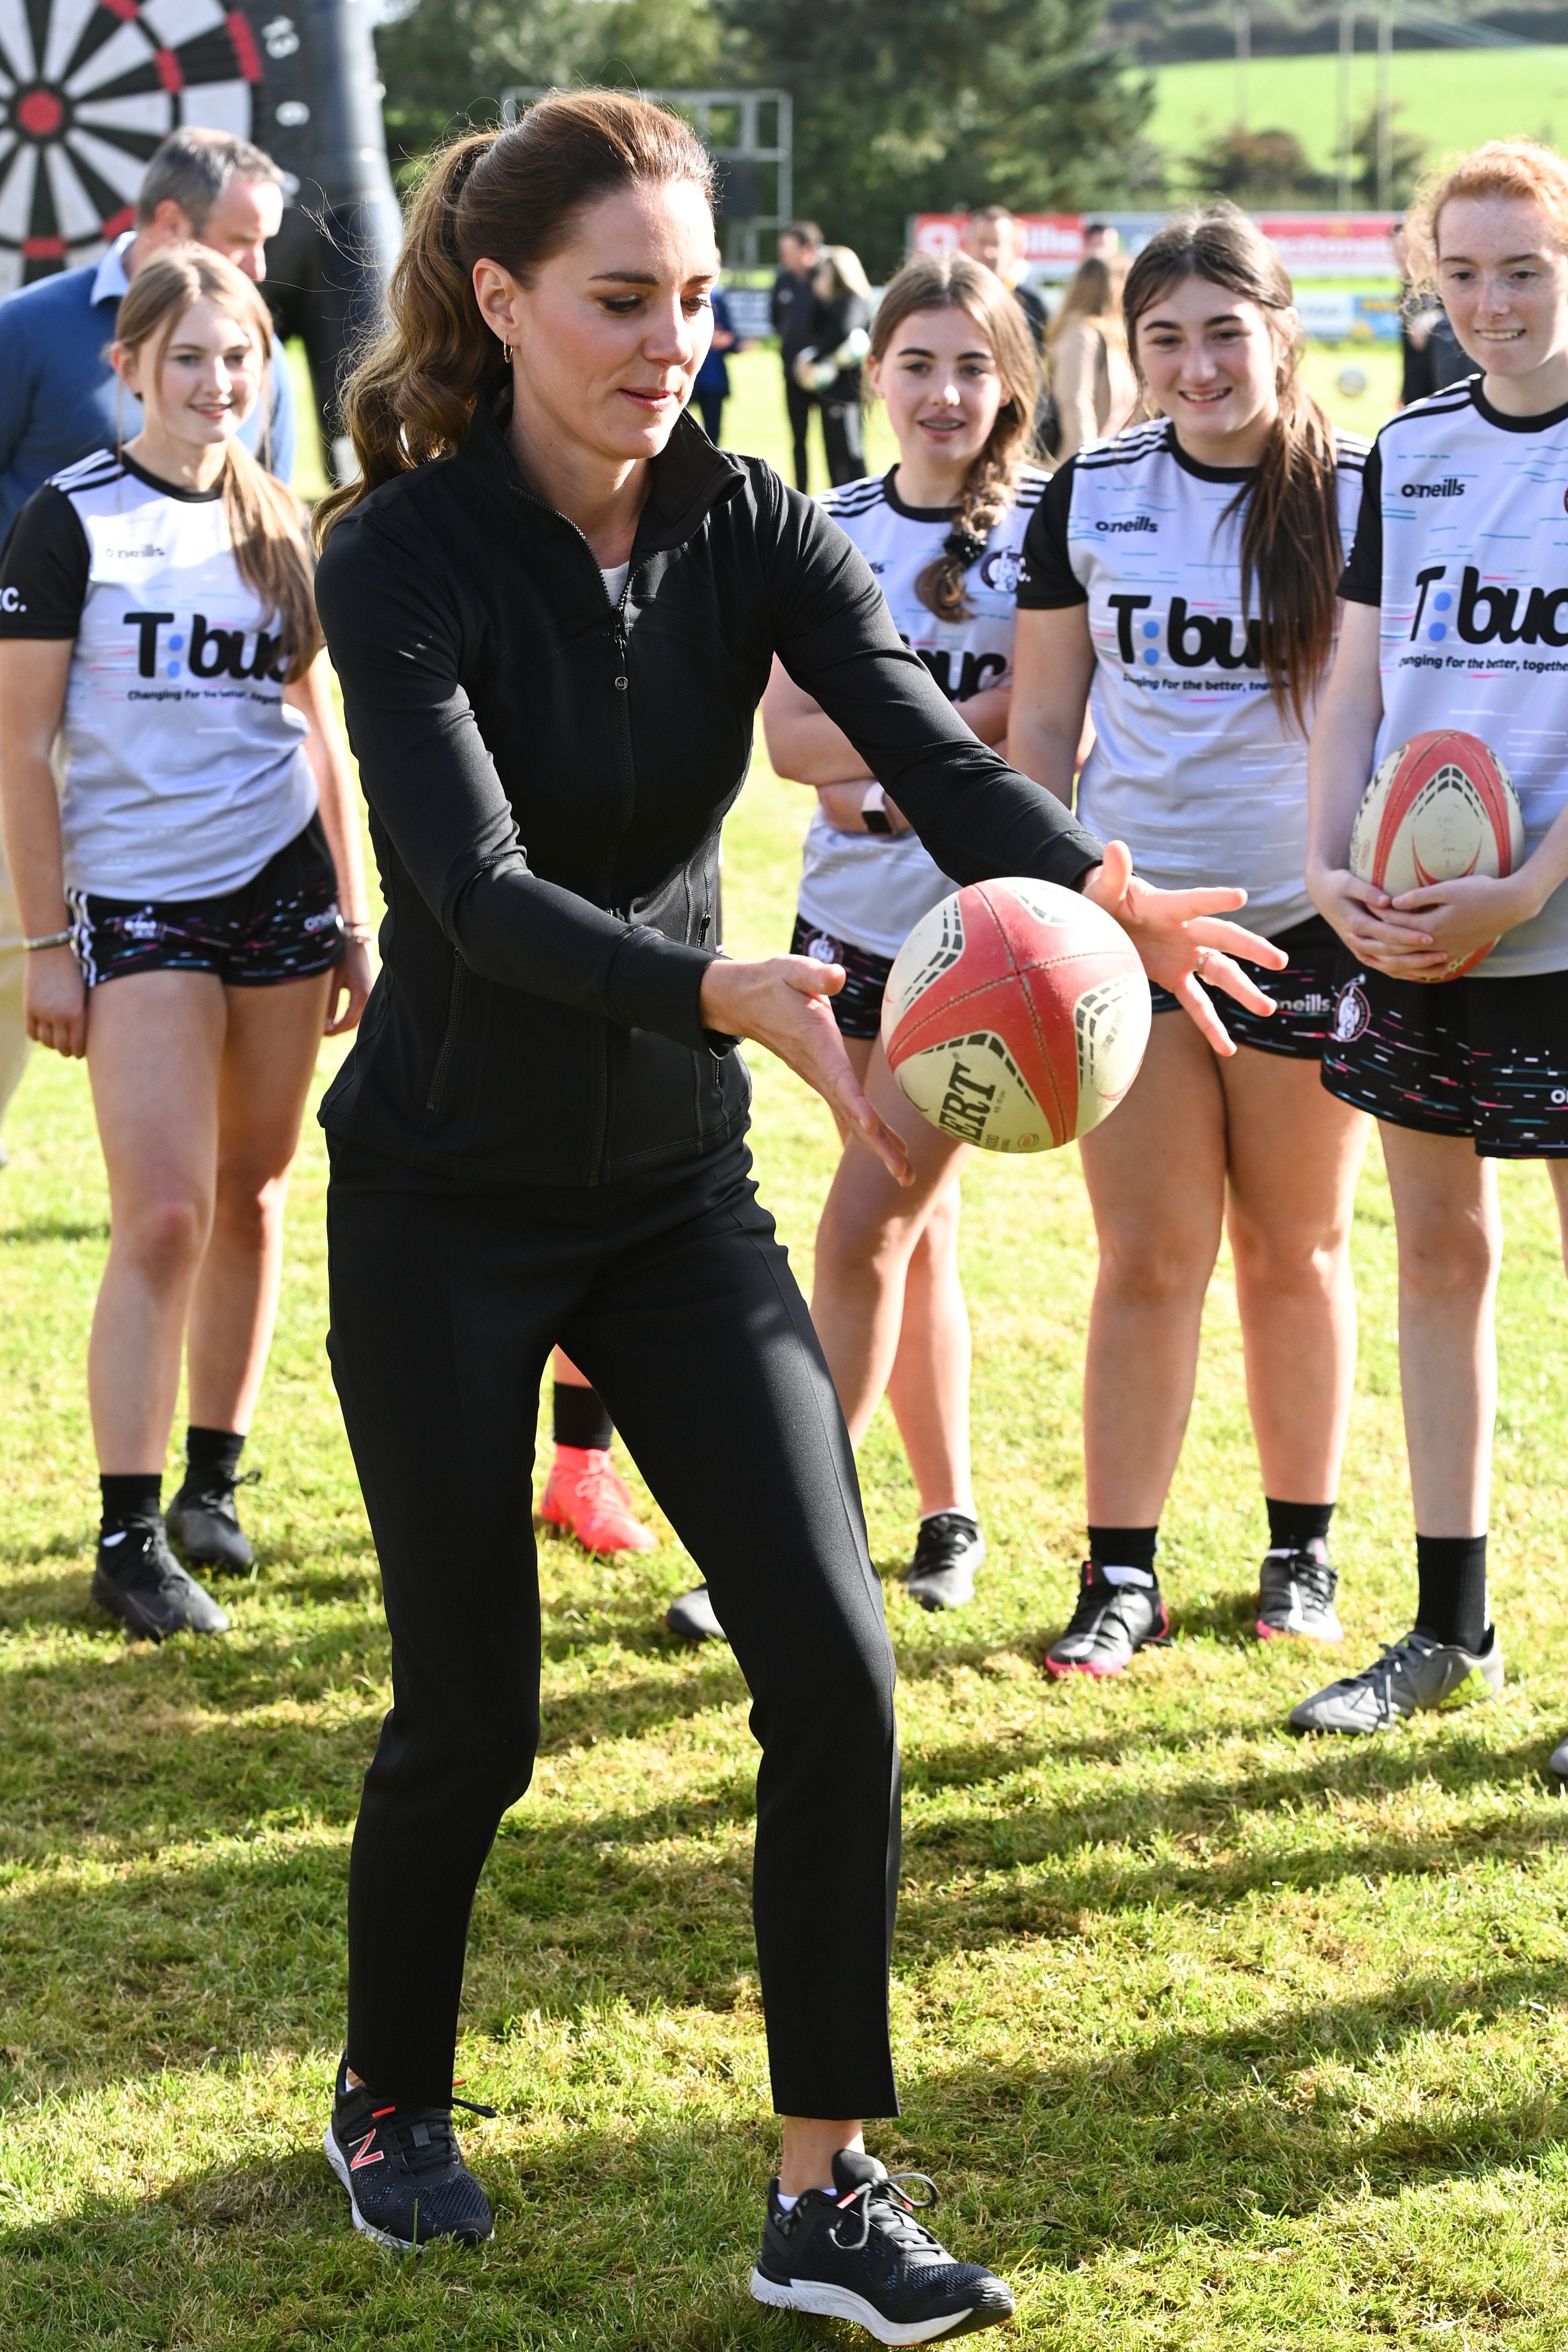 The Duchess of Cambridge kicking a rugby ball during a visit to the City of Derry rugby club in September (Tim Rooke/PA)